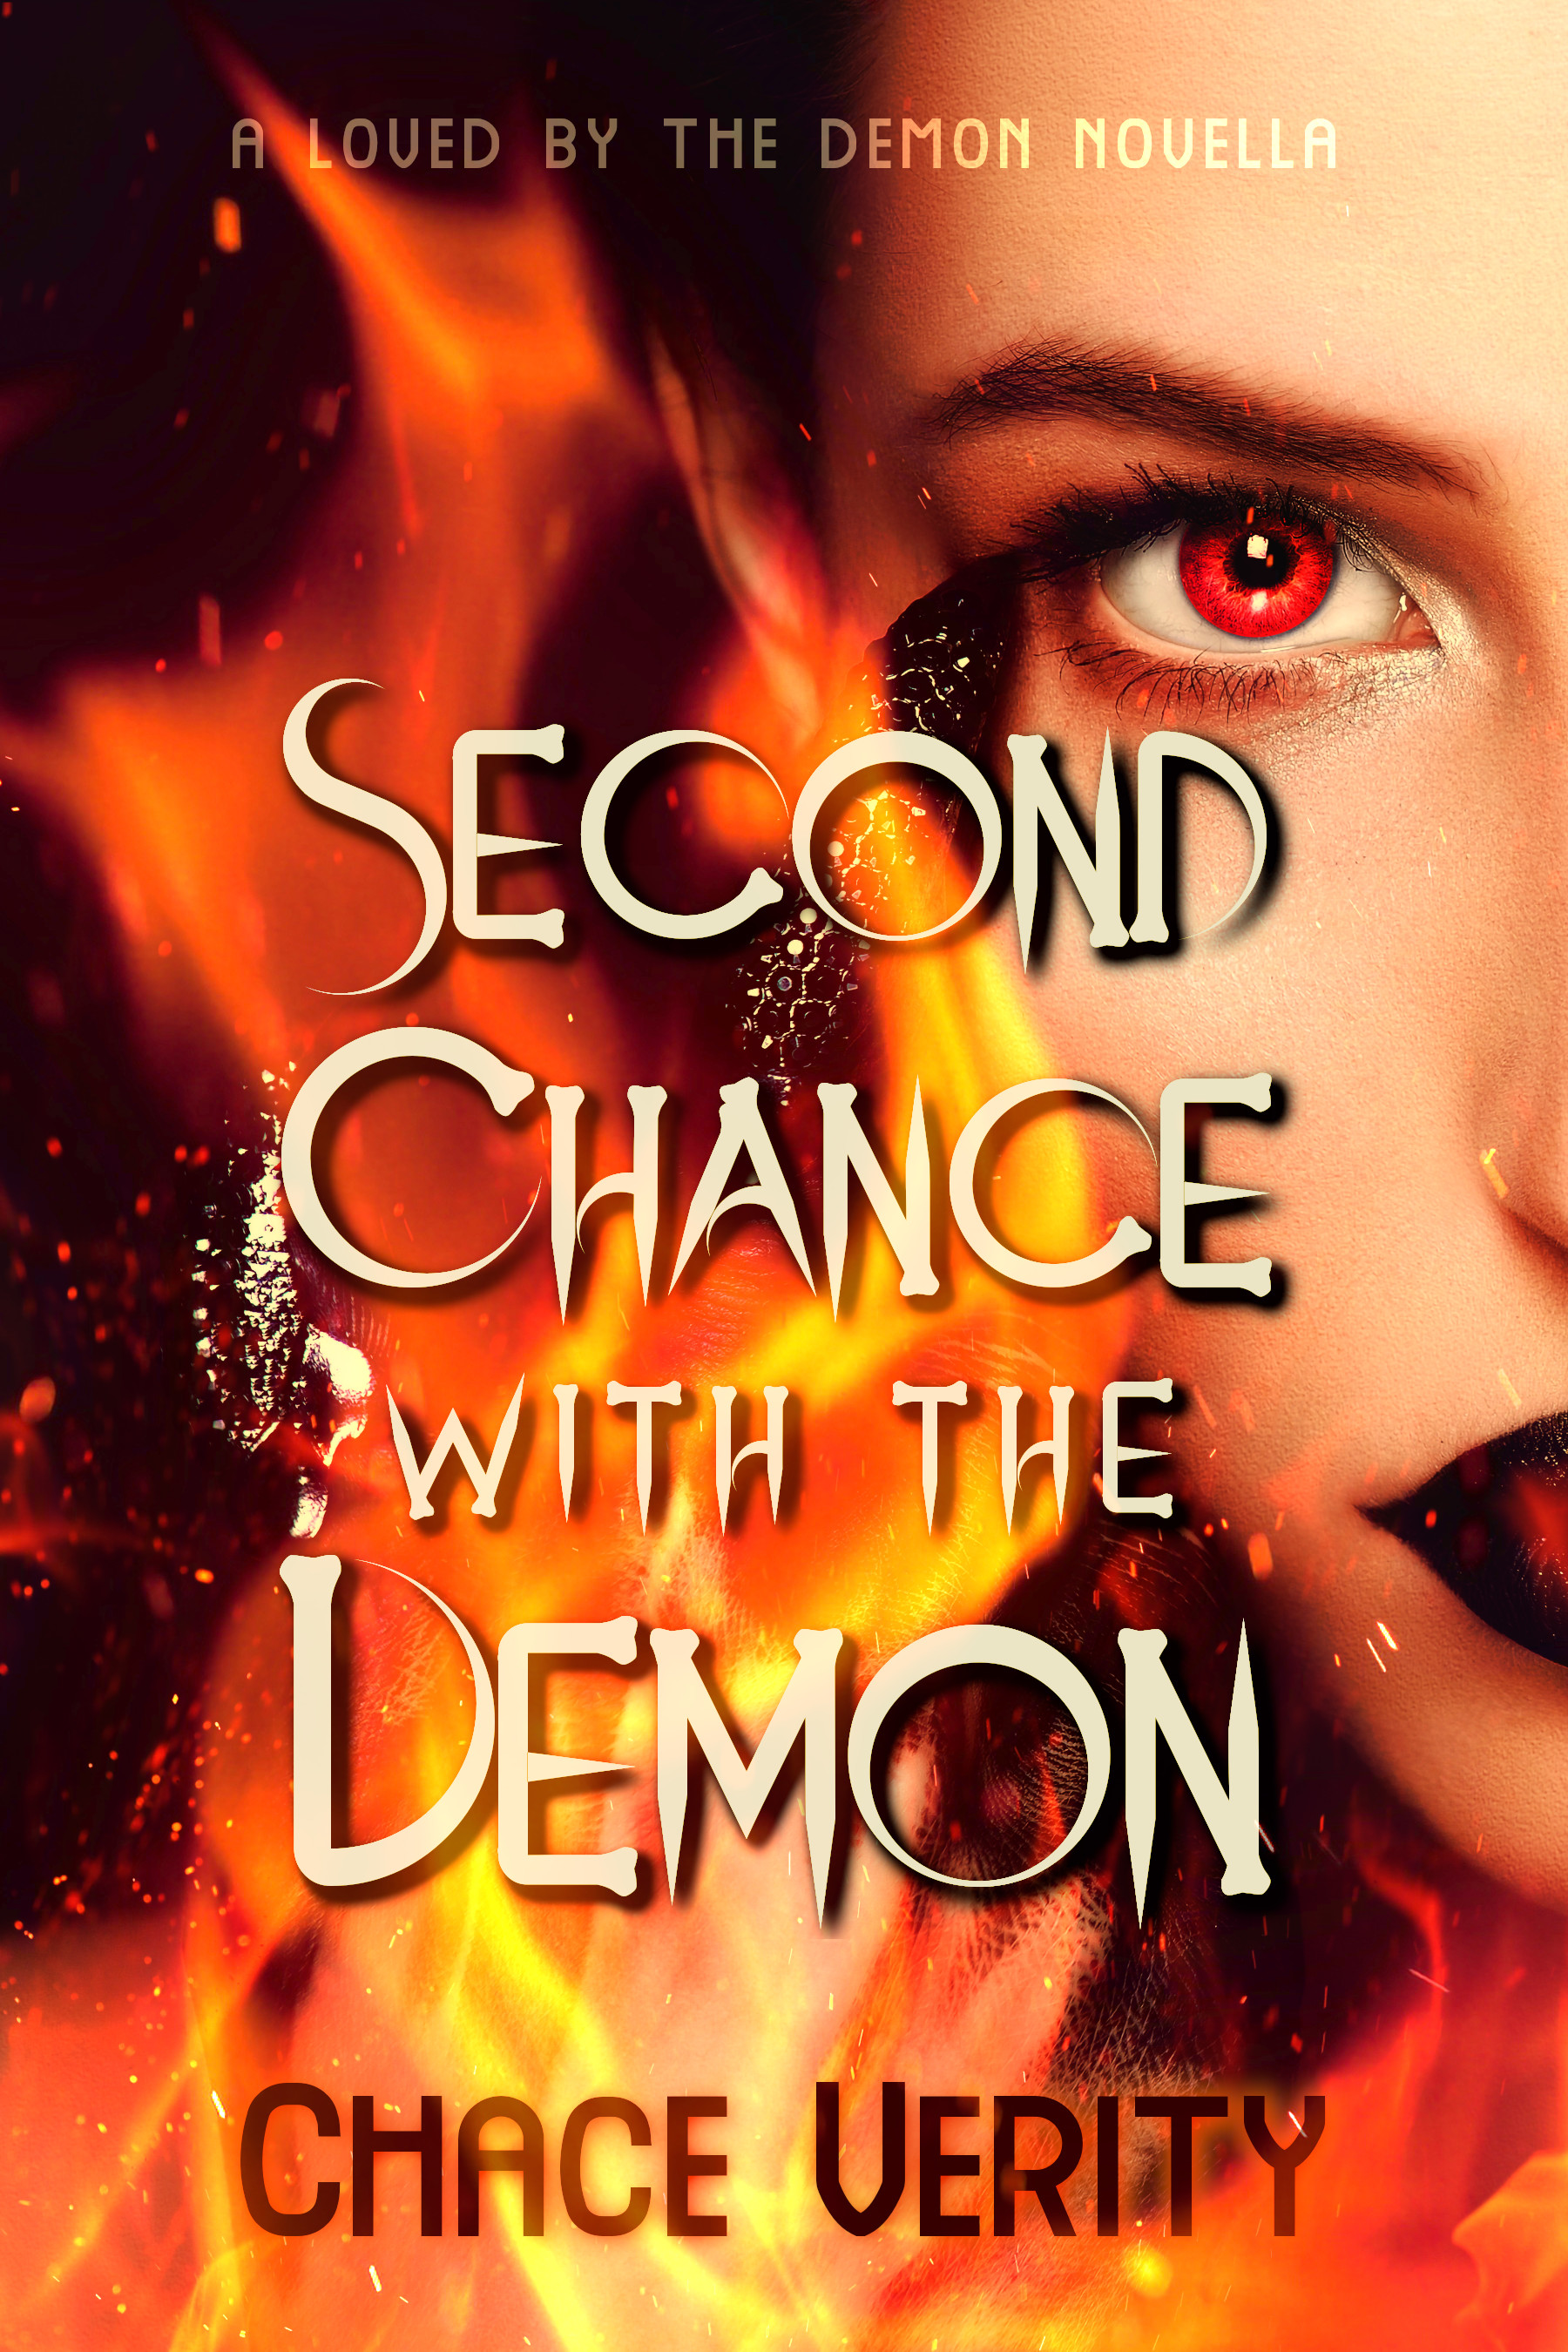 Cover for Chace Verity's <i>Second Chance with the Demon</i> featuring a red-eyed woman with dark makeup and black talons surrounded by fire